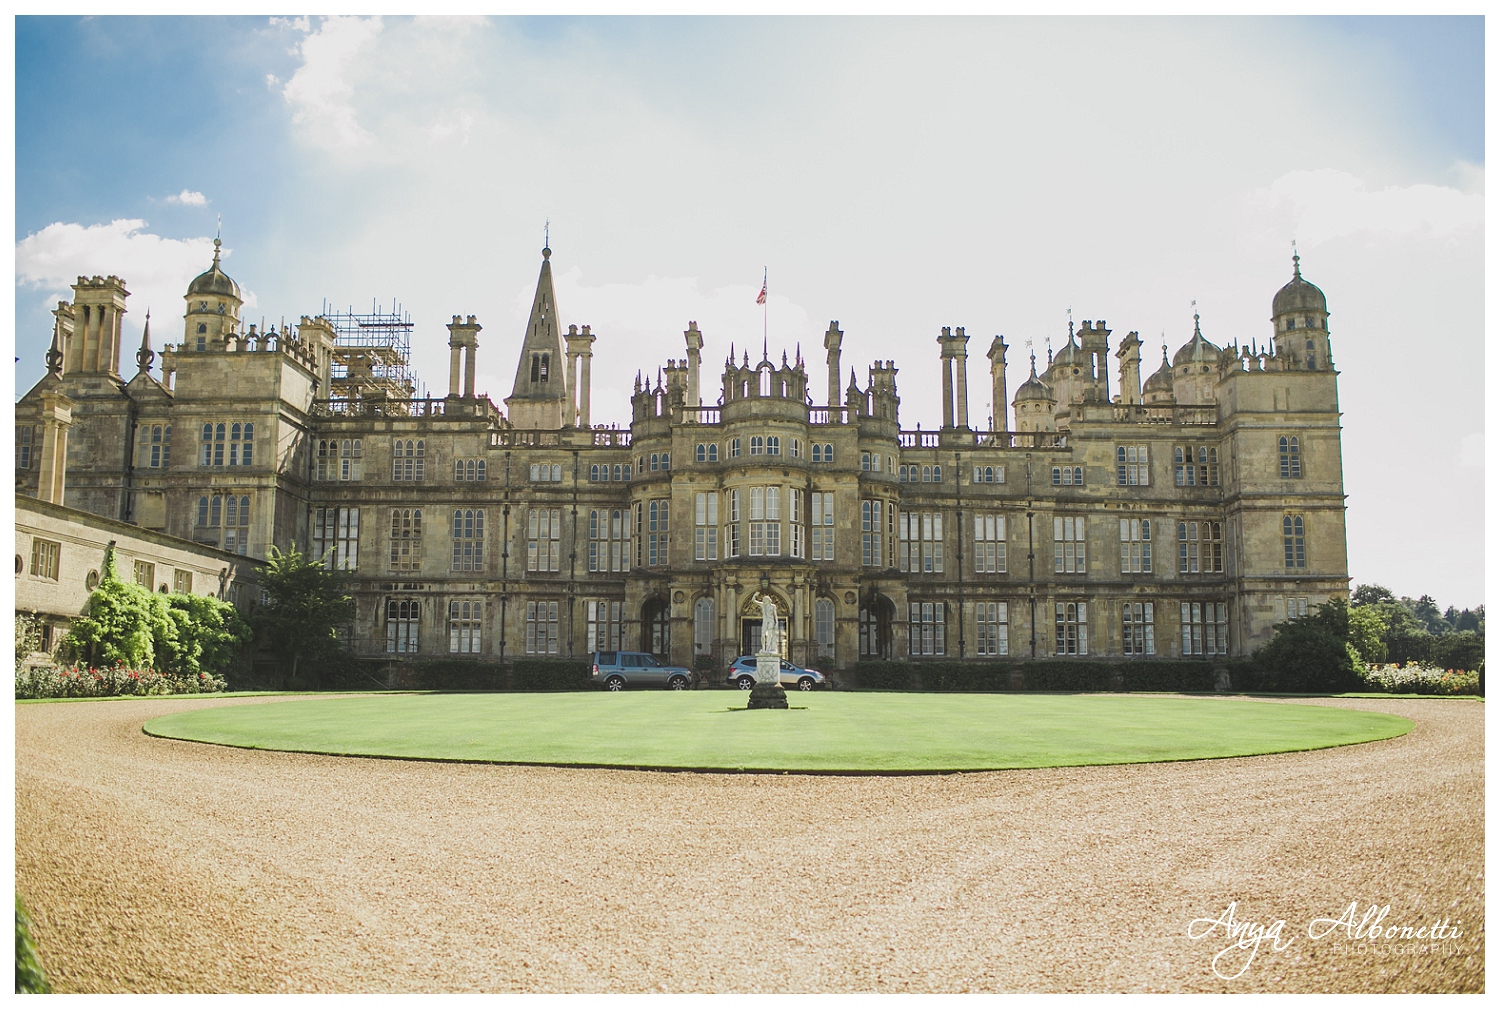 Lincolnshire Engagements | London Engagements | Burghley House